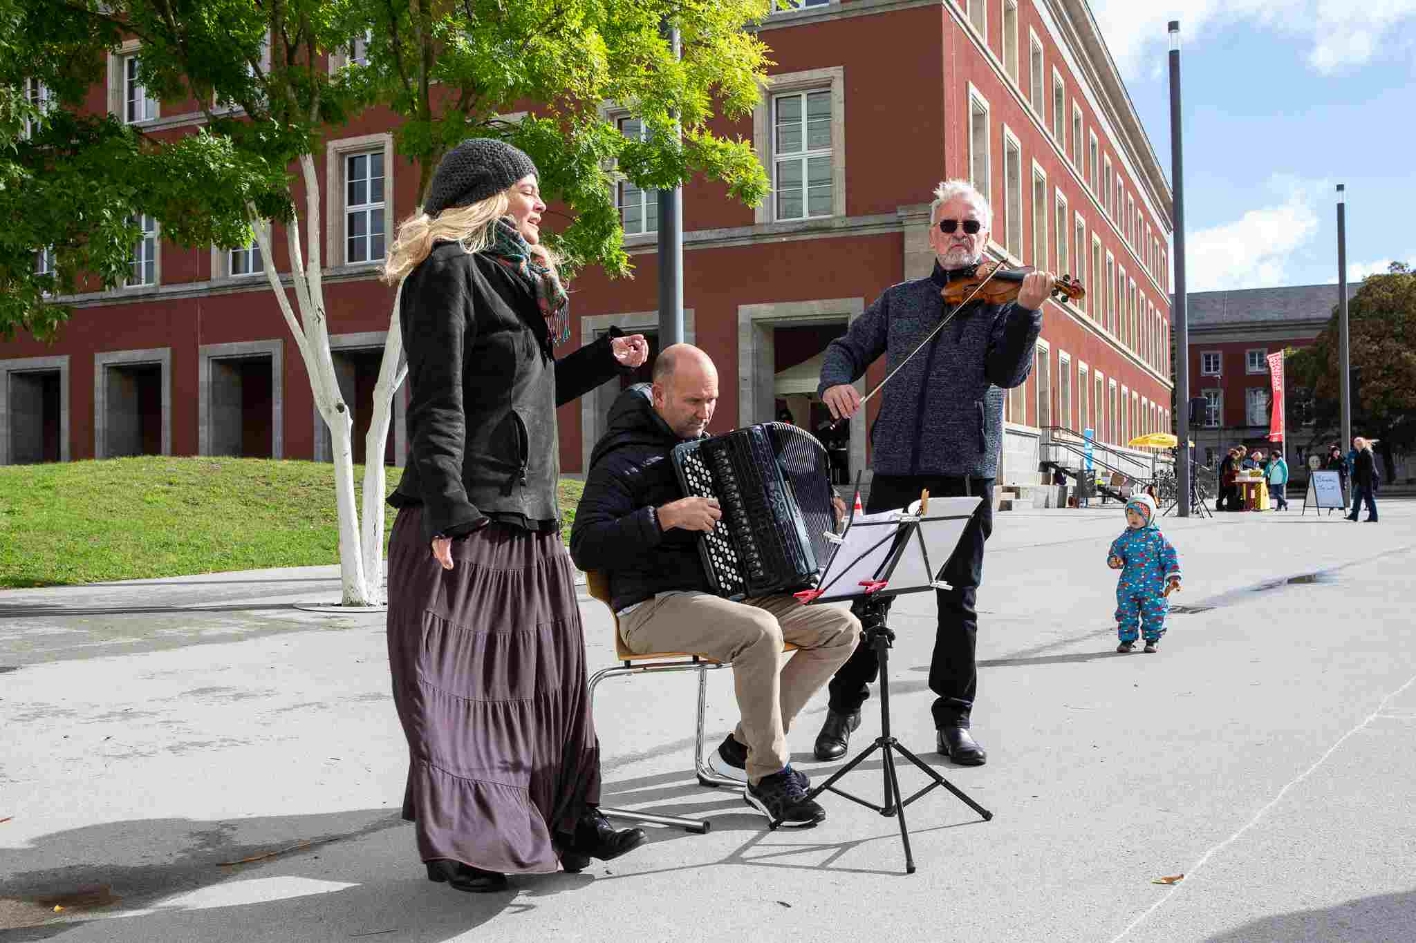 A violinist, an accordion player and a singer of the String Company Erfurt accompany the writing action musically. In the background, a toddler in a blue anorak can be seen standing free in the square and looking eagerly at the musicians.